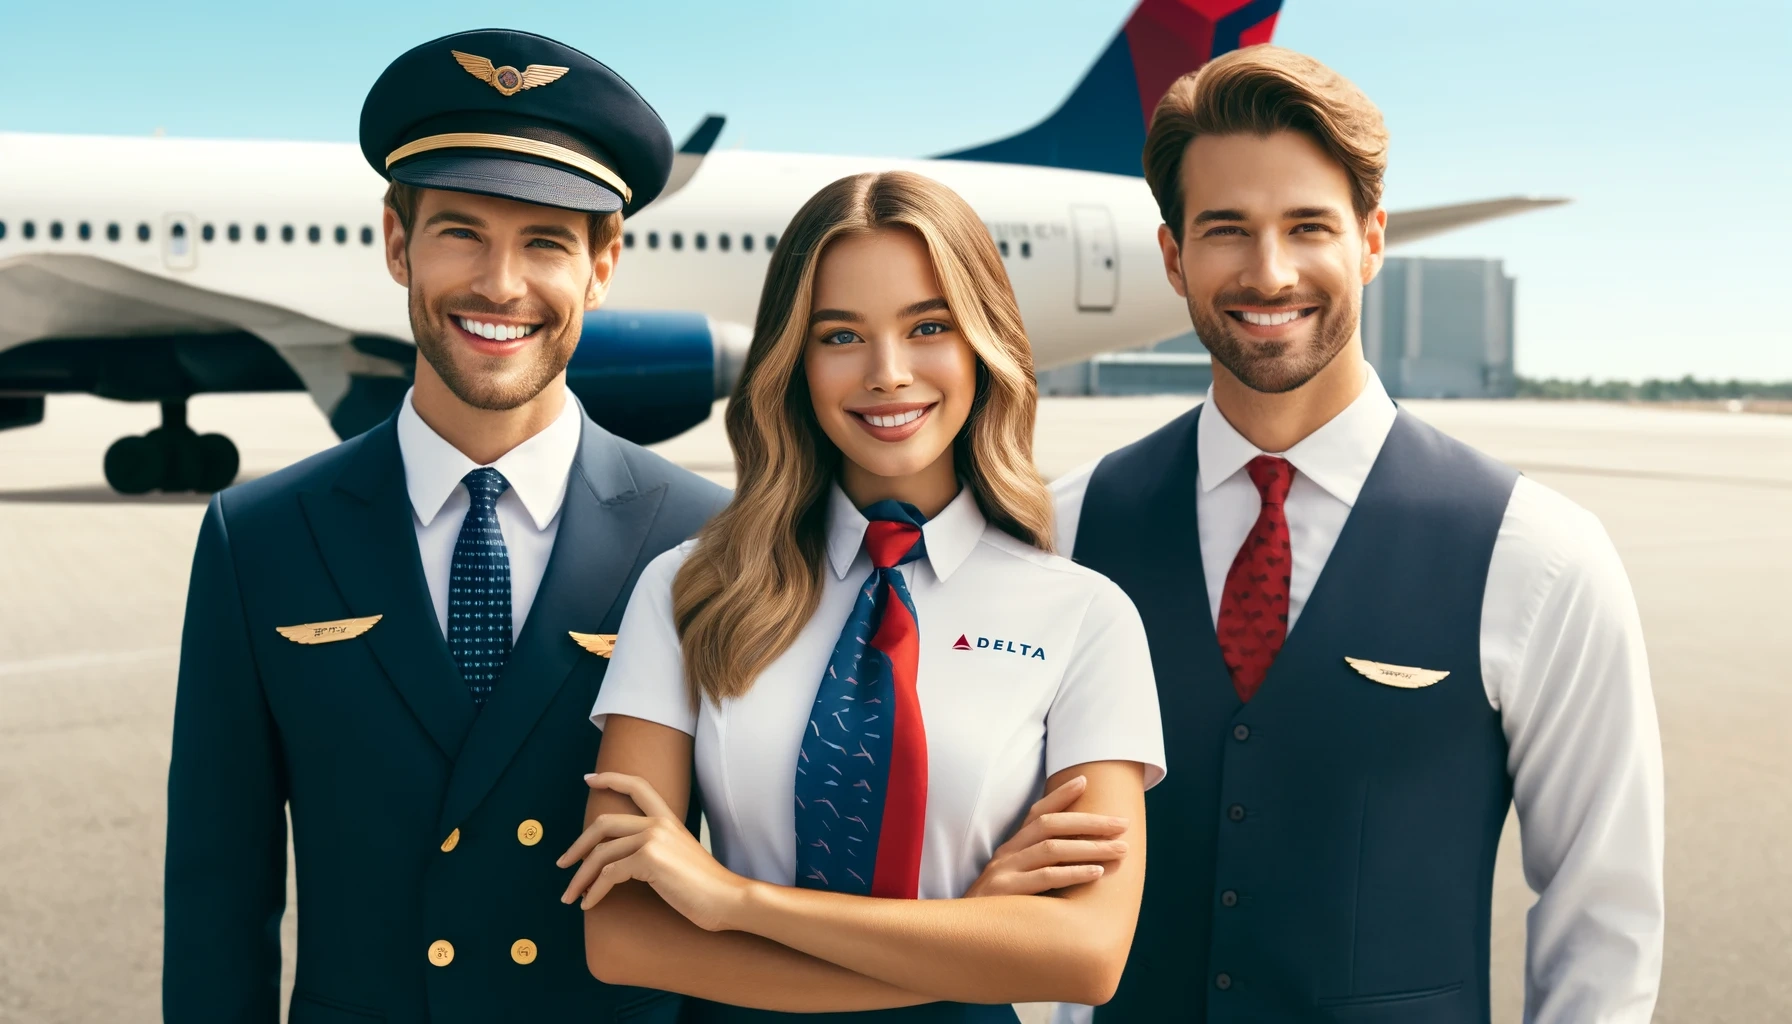 Job Openings at Delta Air Lines: Learn How to Apply